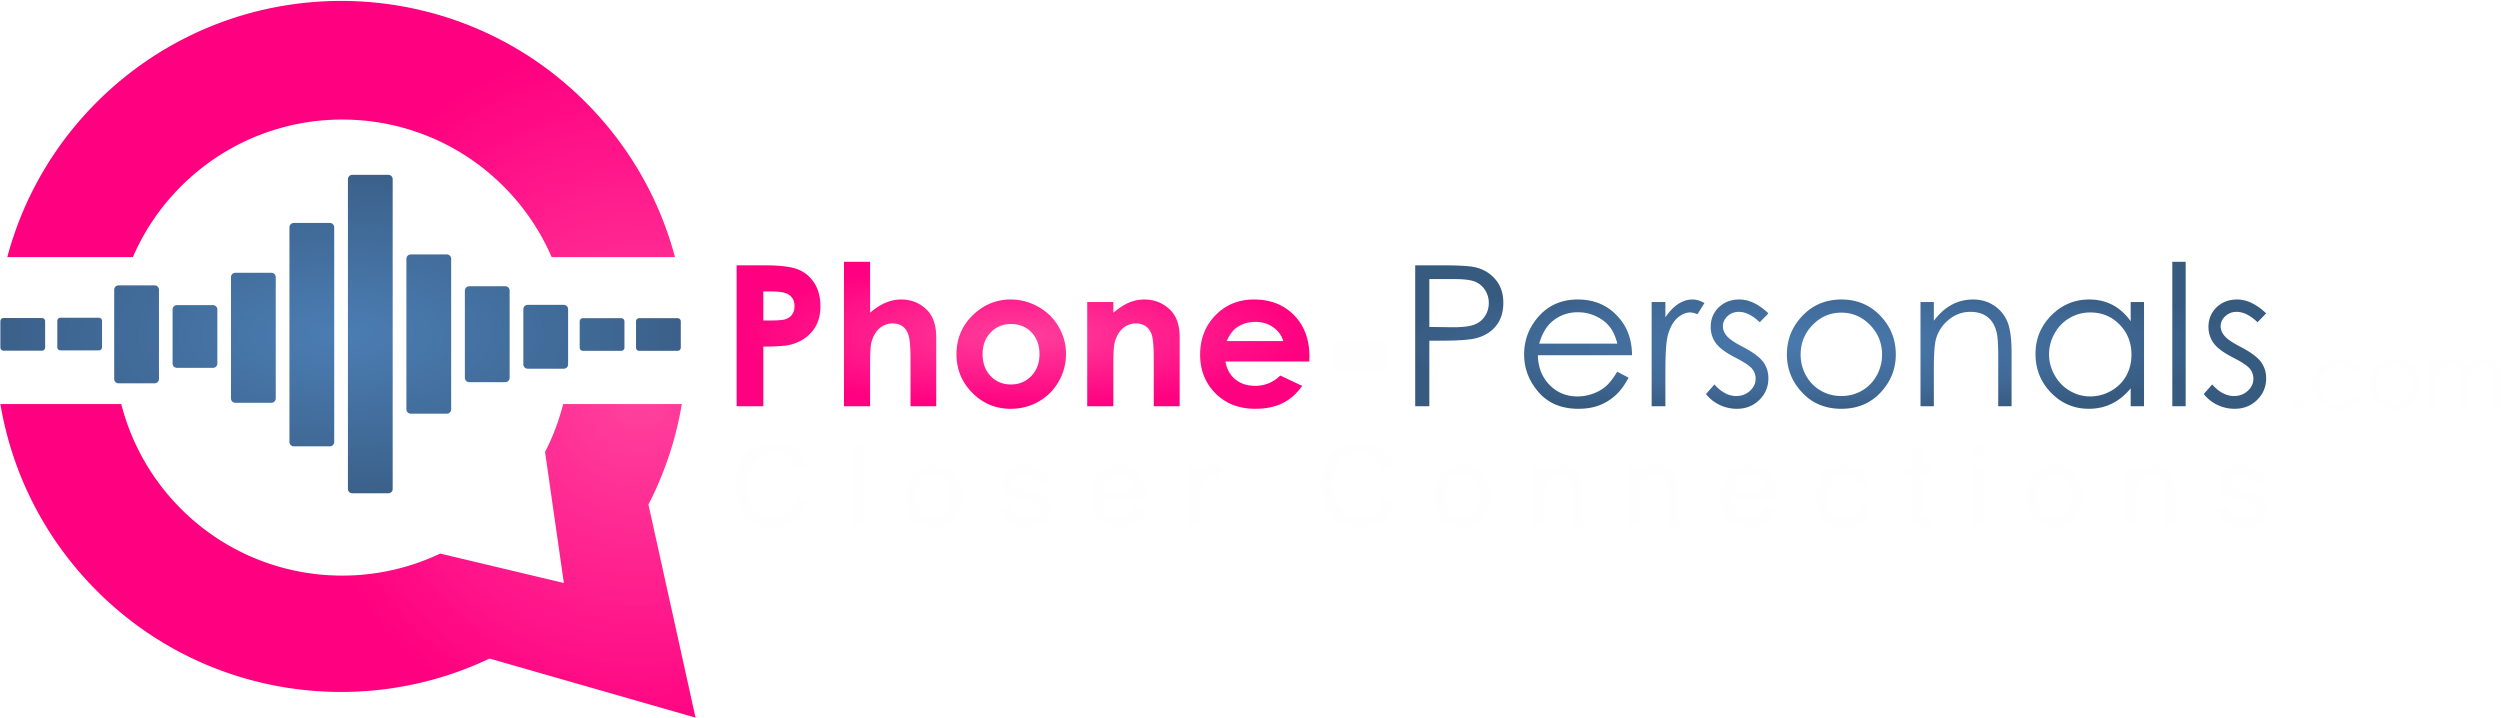 Phone Personals - Closer Connections